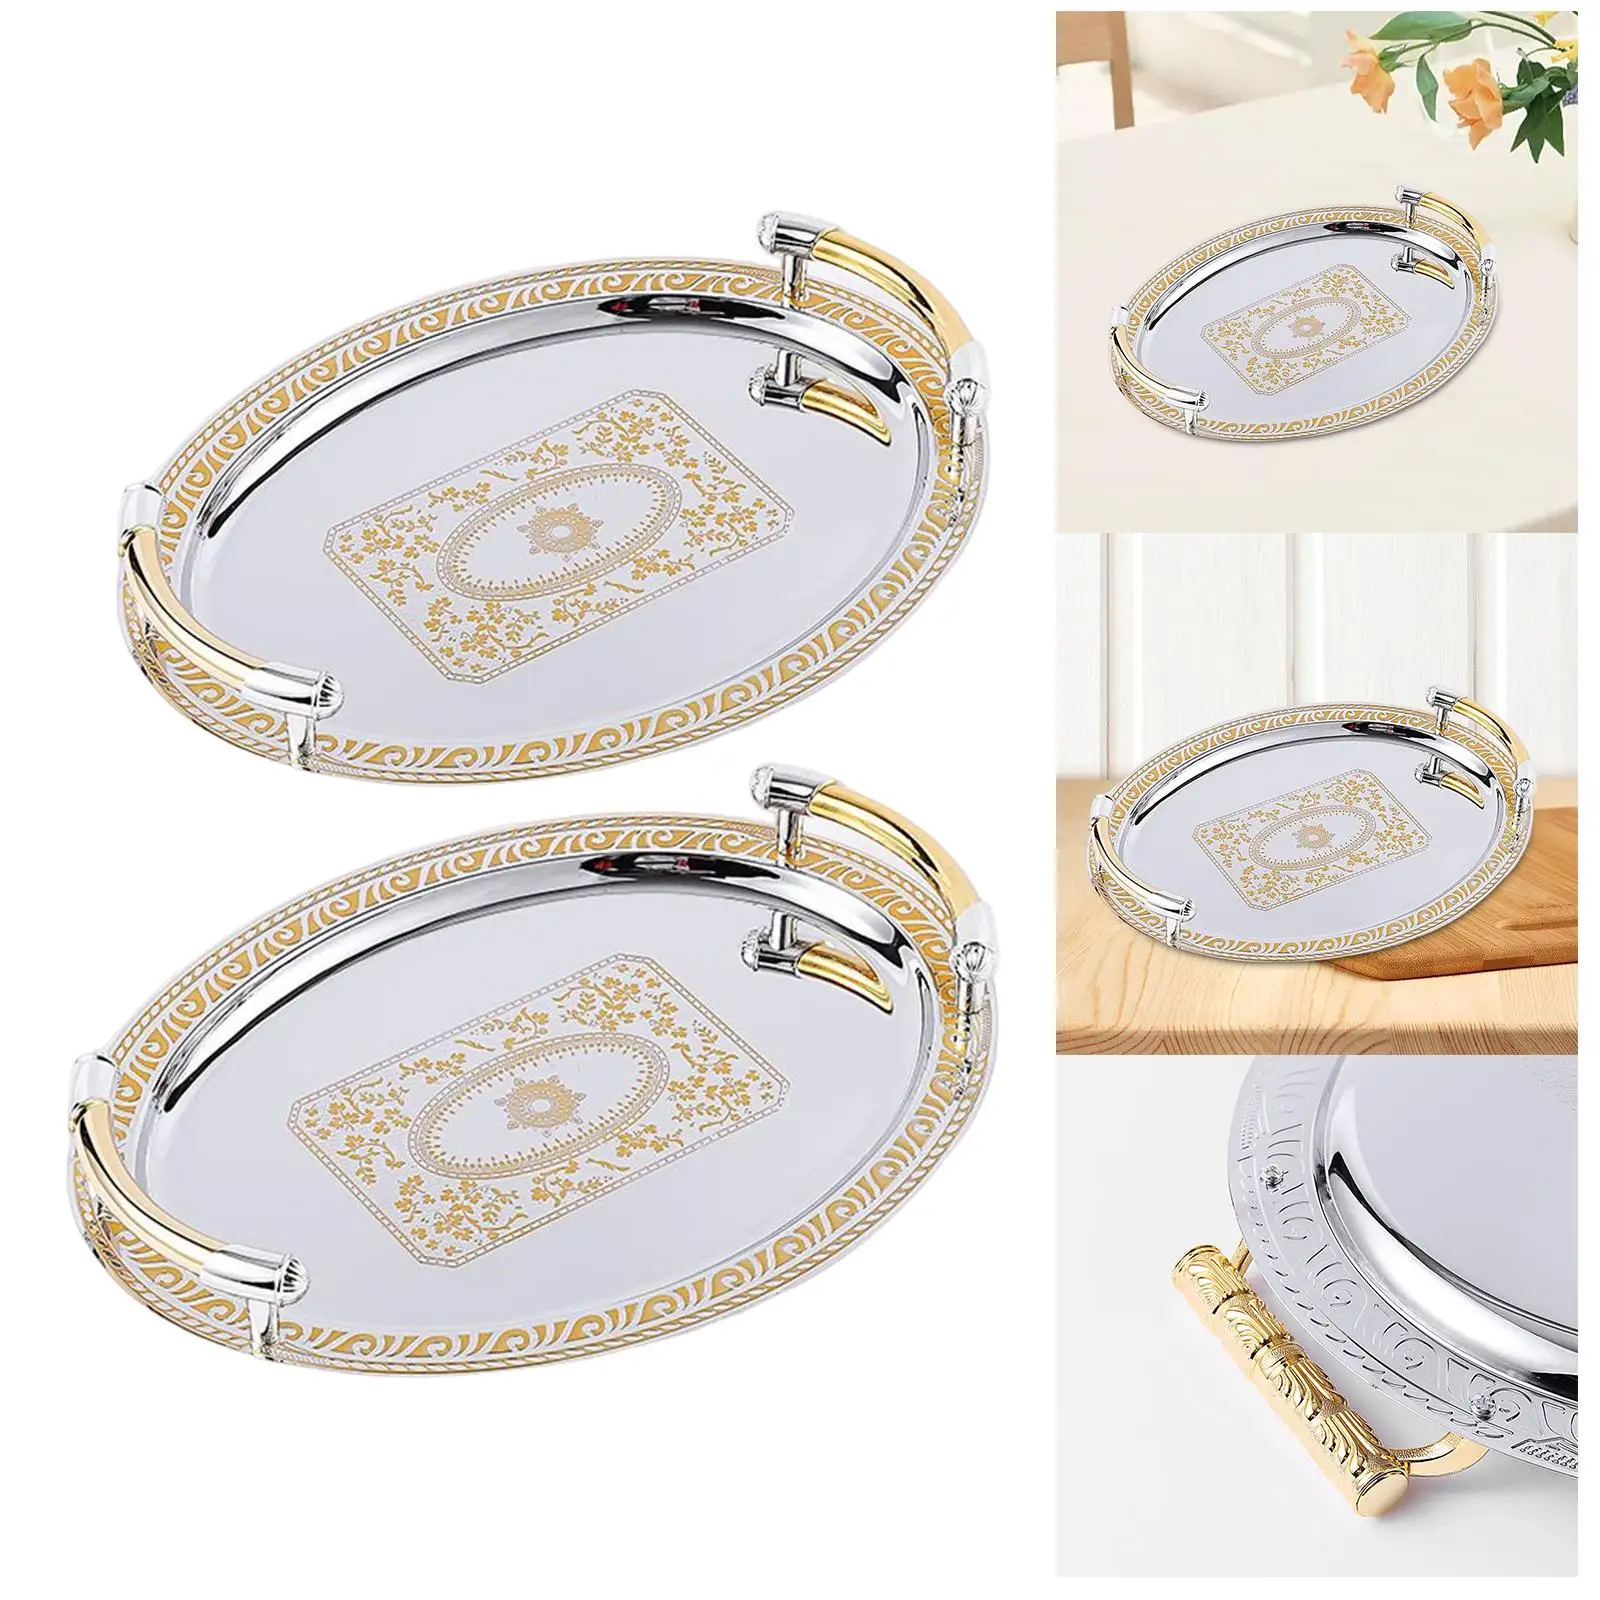 Nordic Fruit Dessert Tray with Handles Vanity Platter Breakfast Tray Decorative Tray for Bedroom Bathroom Party Living Room Home